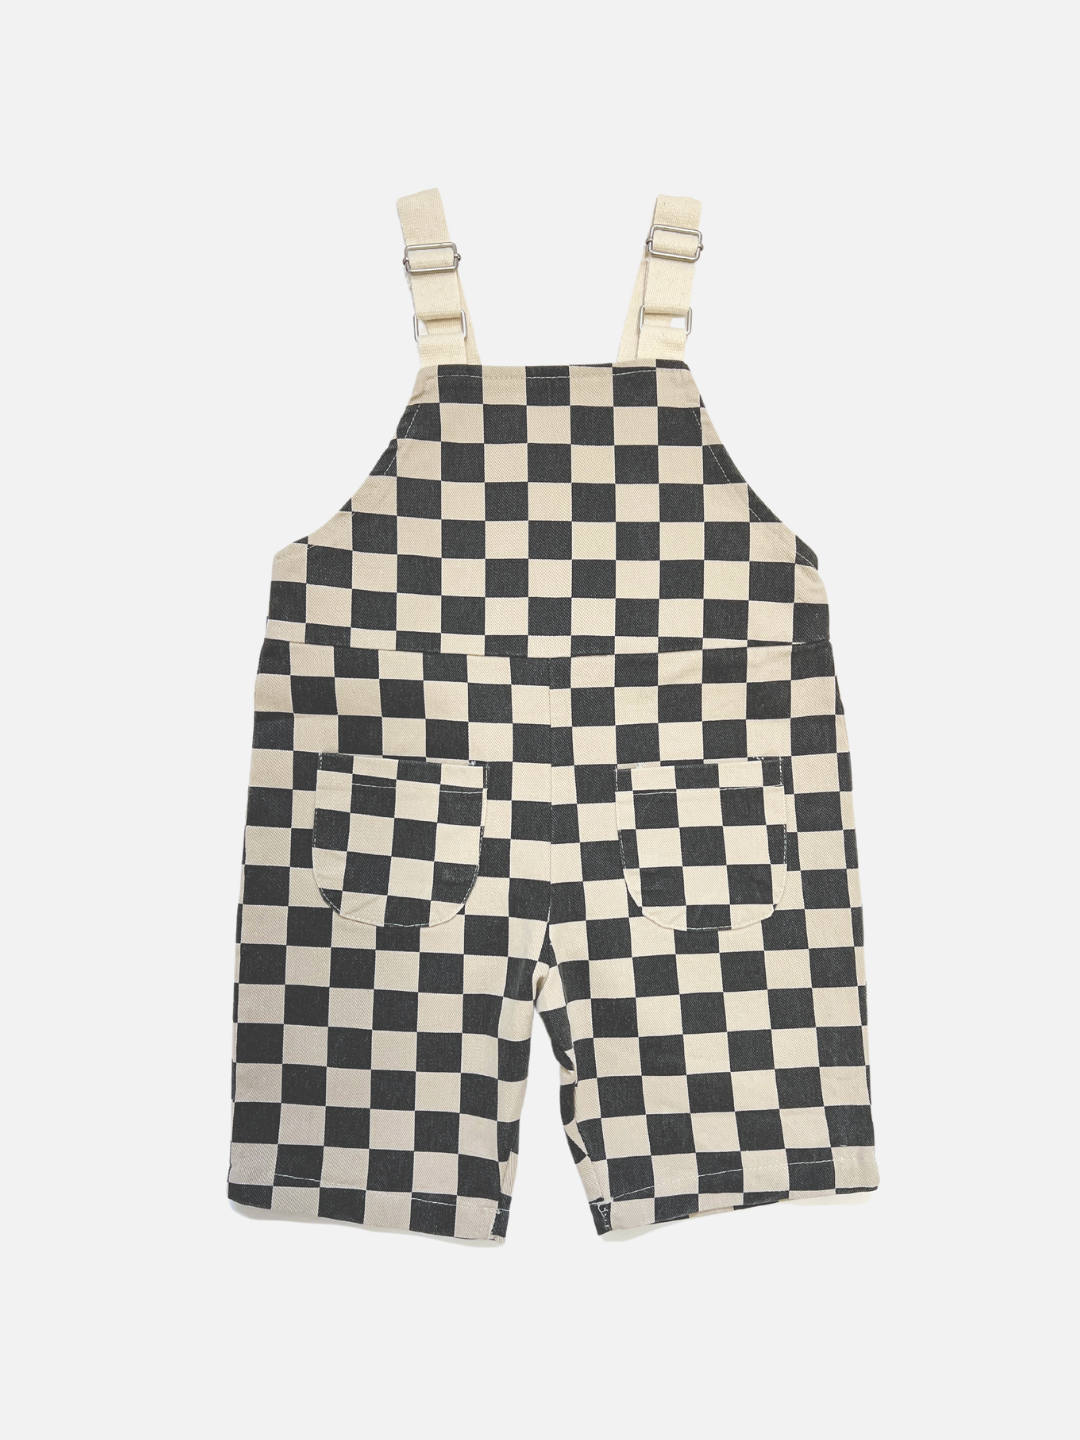 A front view of kid's checker overall in  off-white